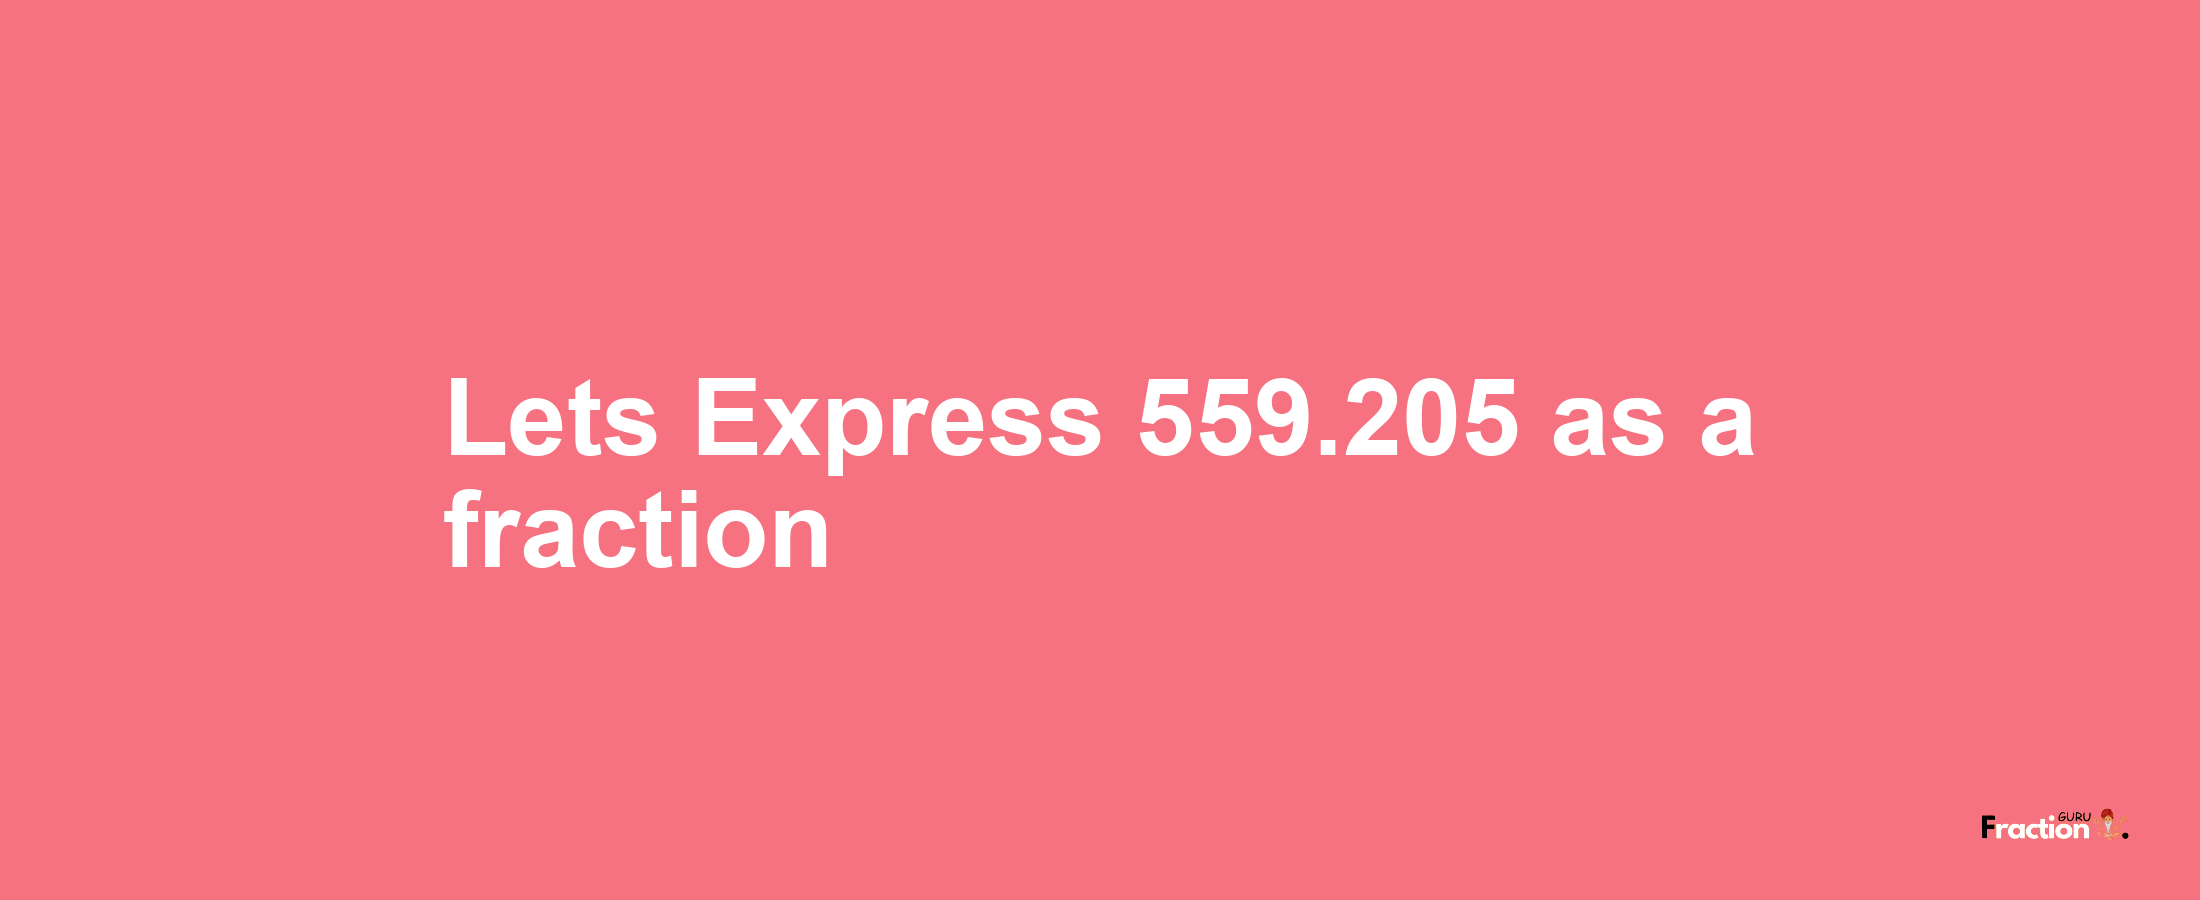 Lets Express 559.205 as afraction